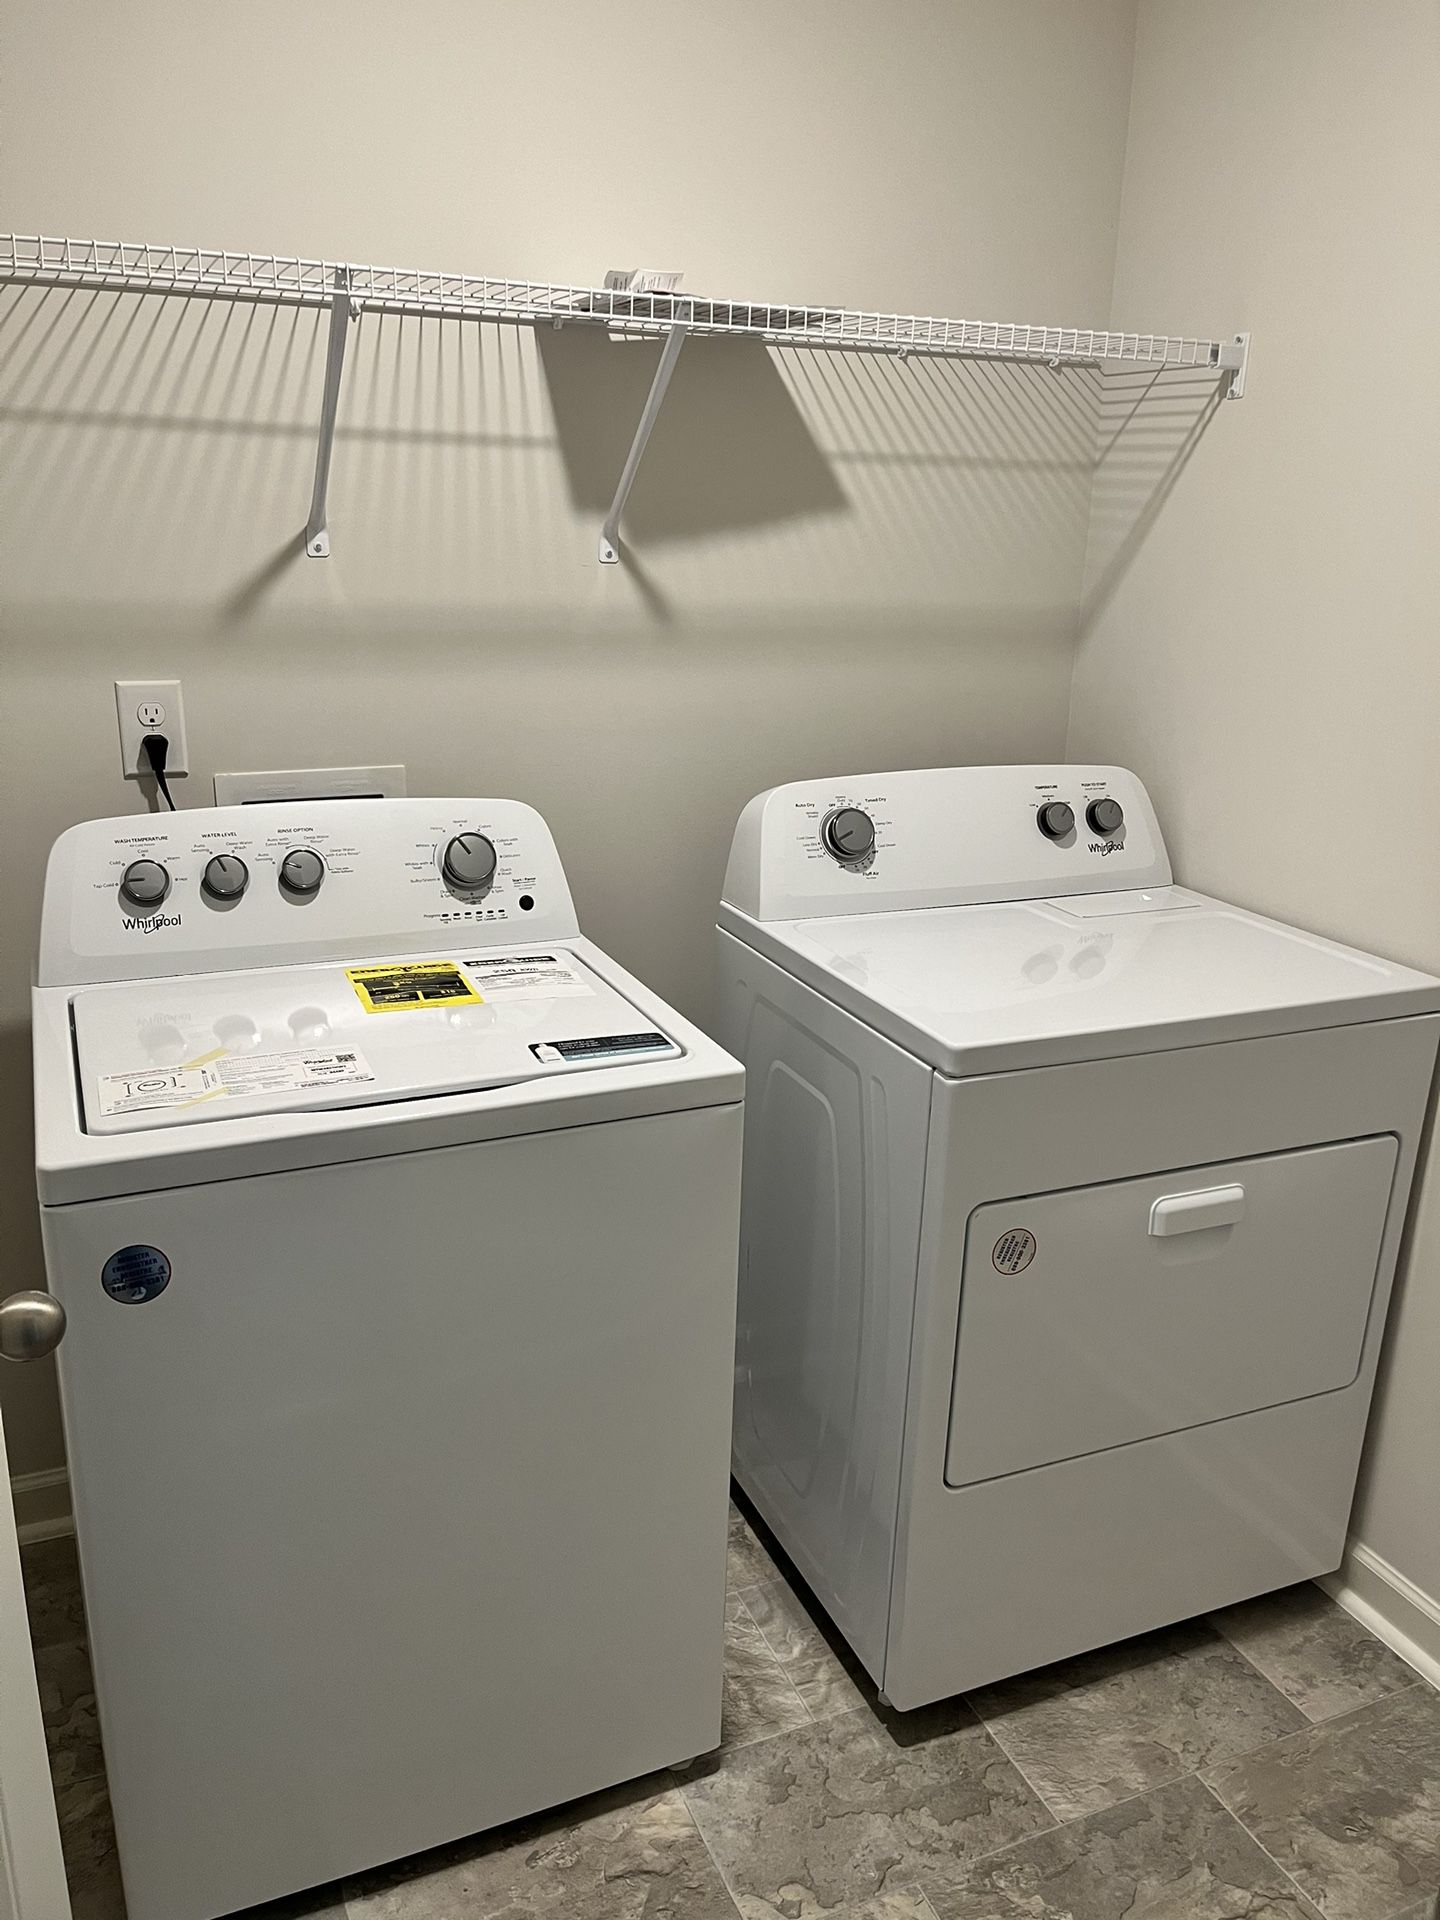 (Never Used) Whirlpool Washer And Dryer Set